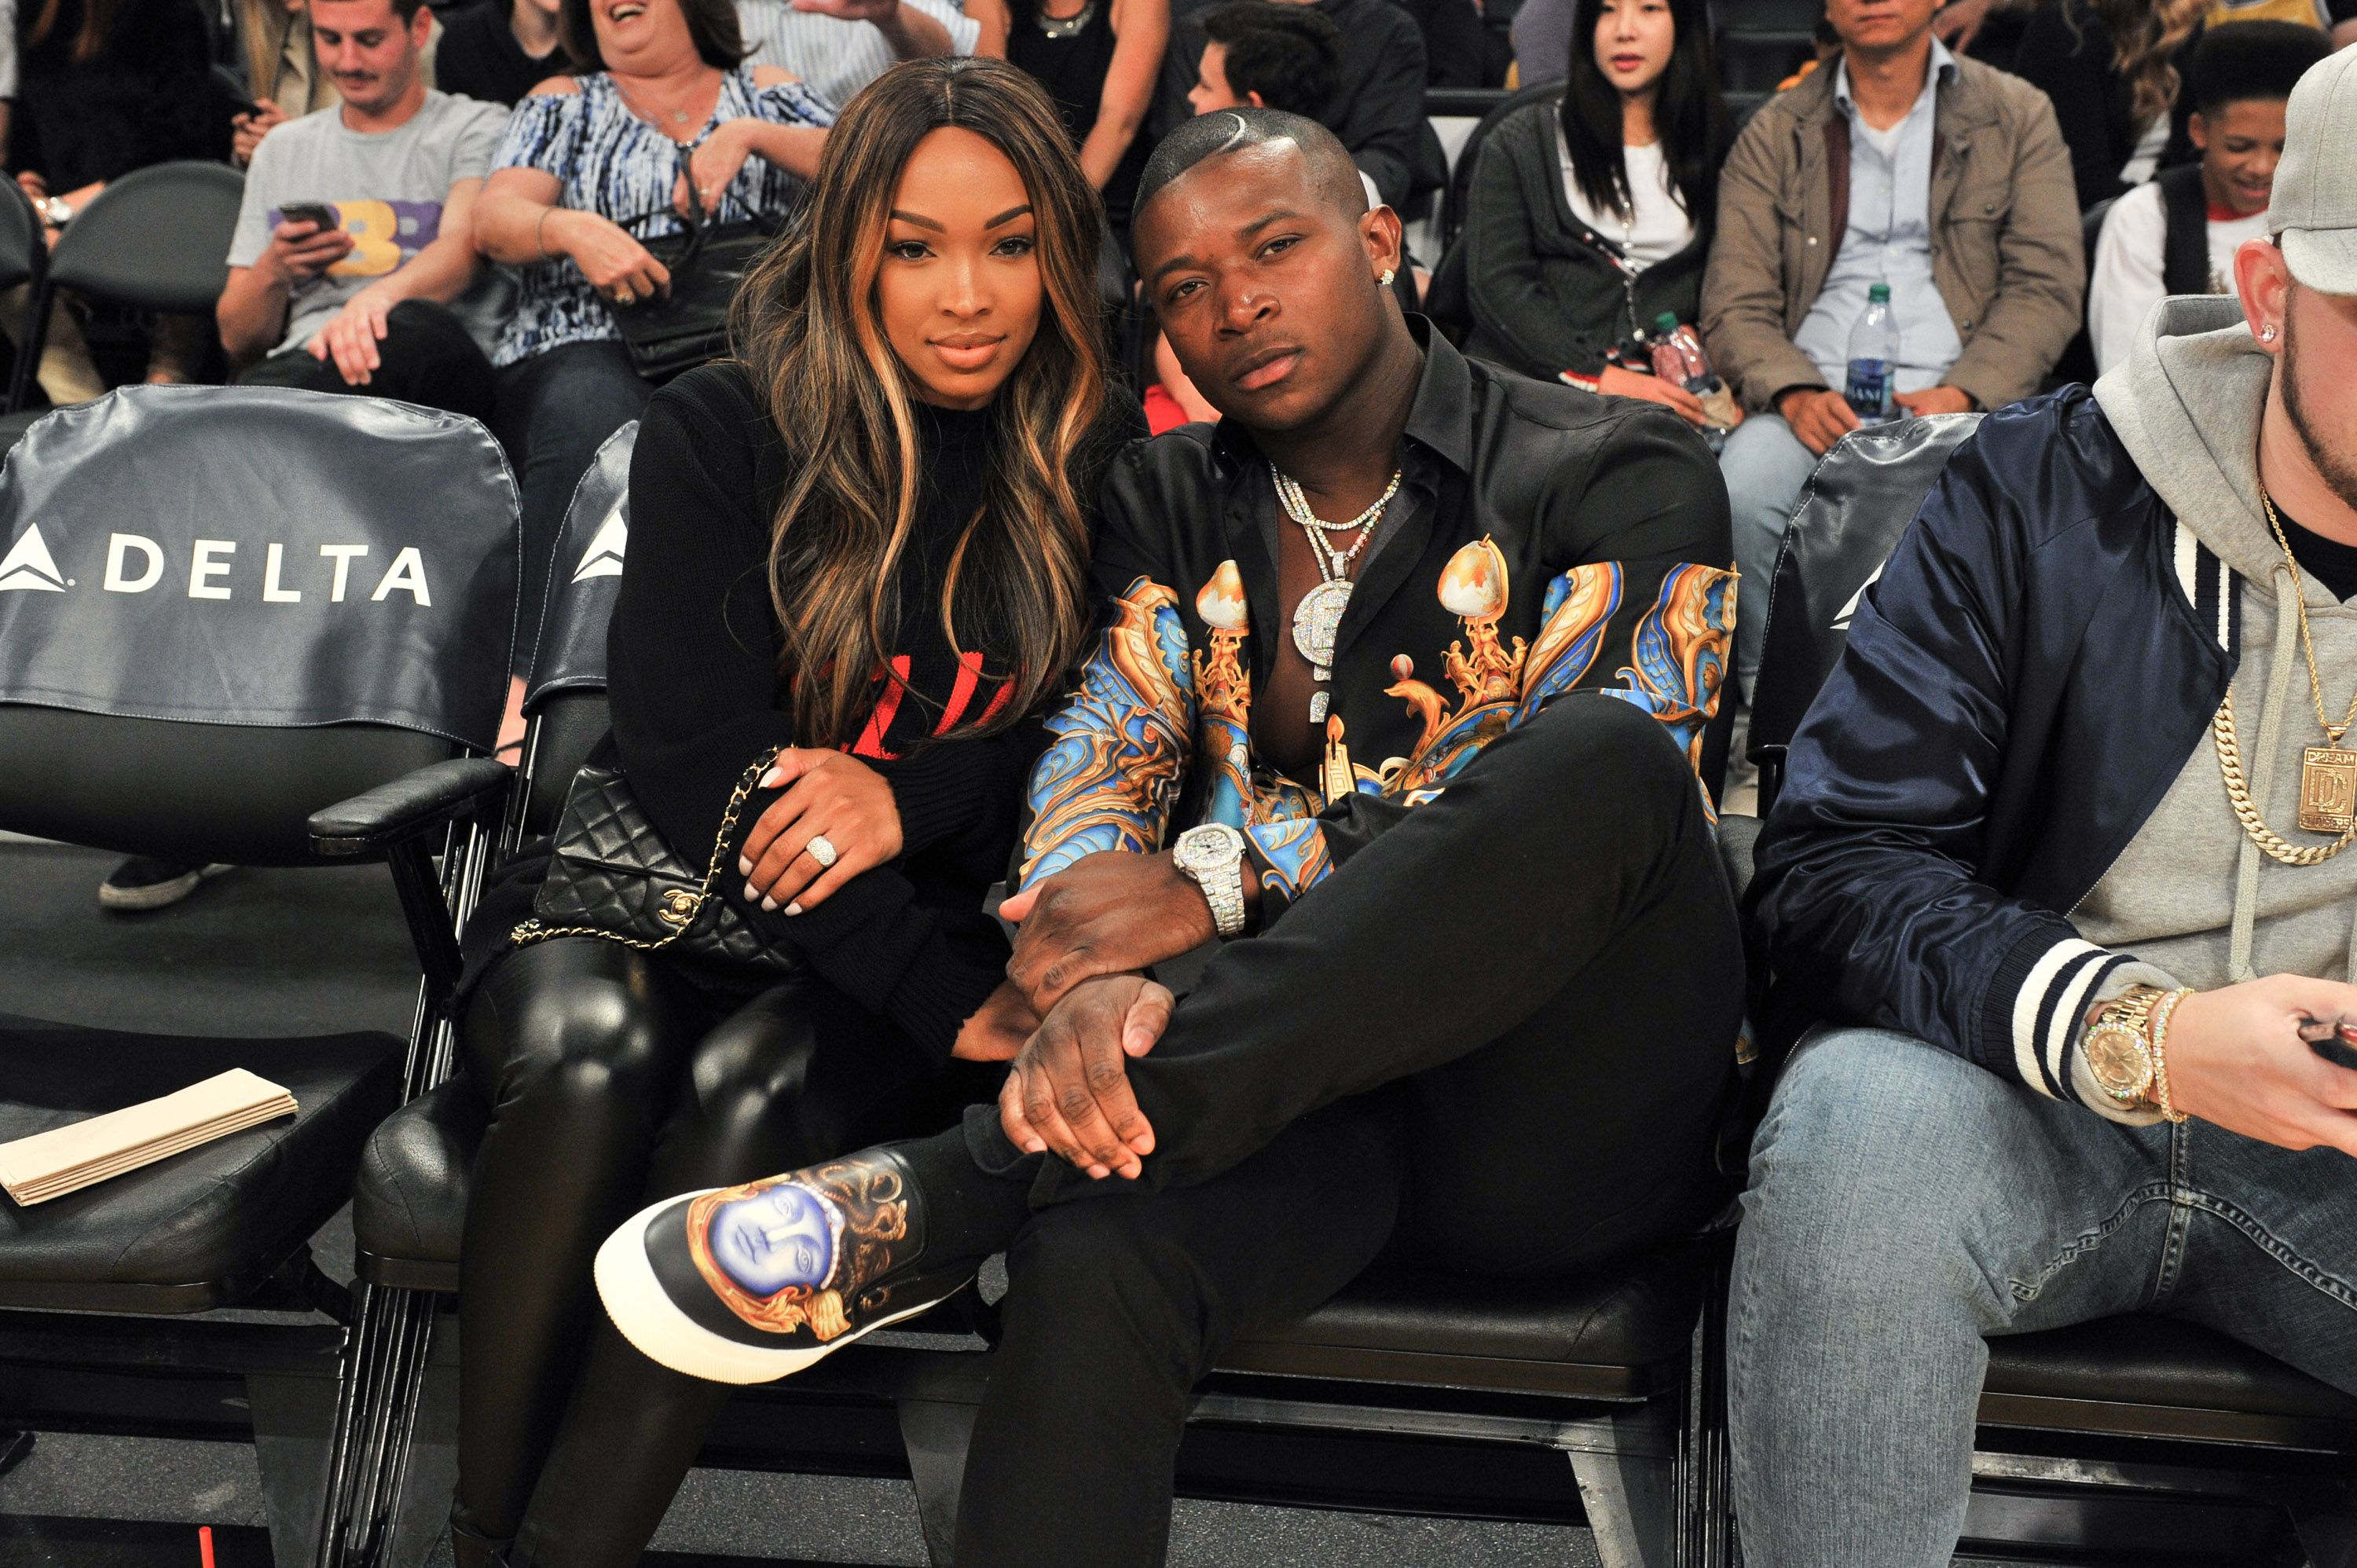 Malika Haqq and O.T. Genasis during a basketball game on November 21, 2017 in California. | Source: Getty Images